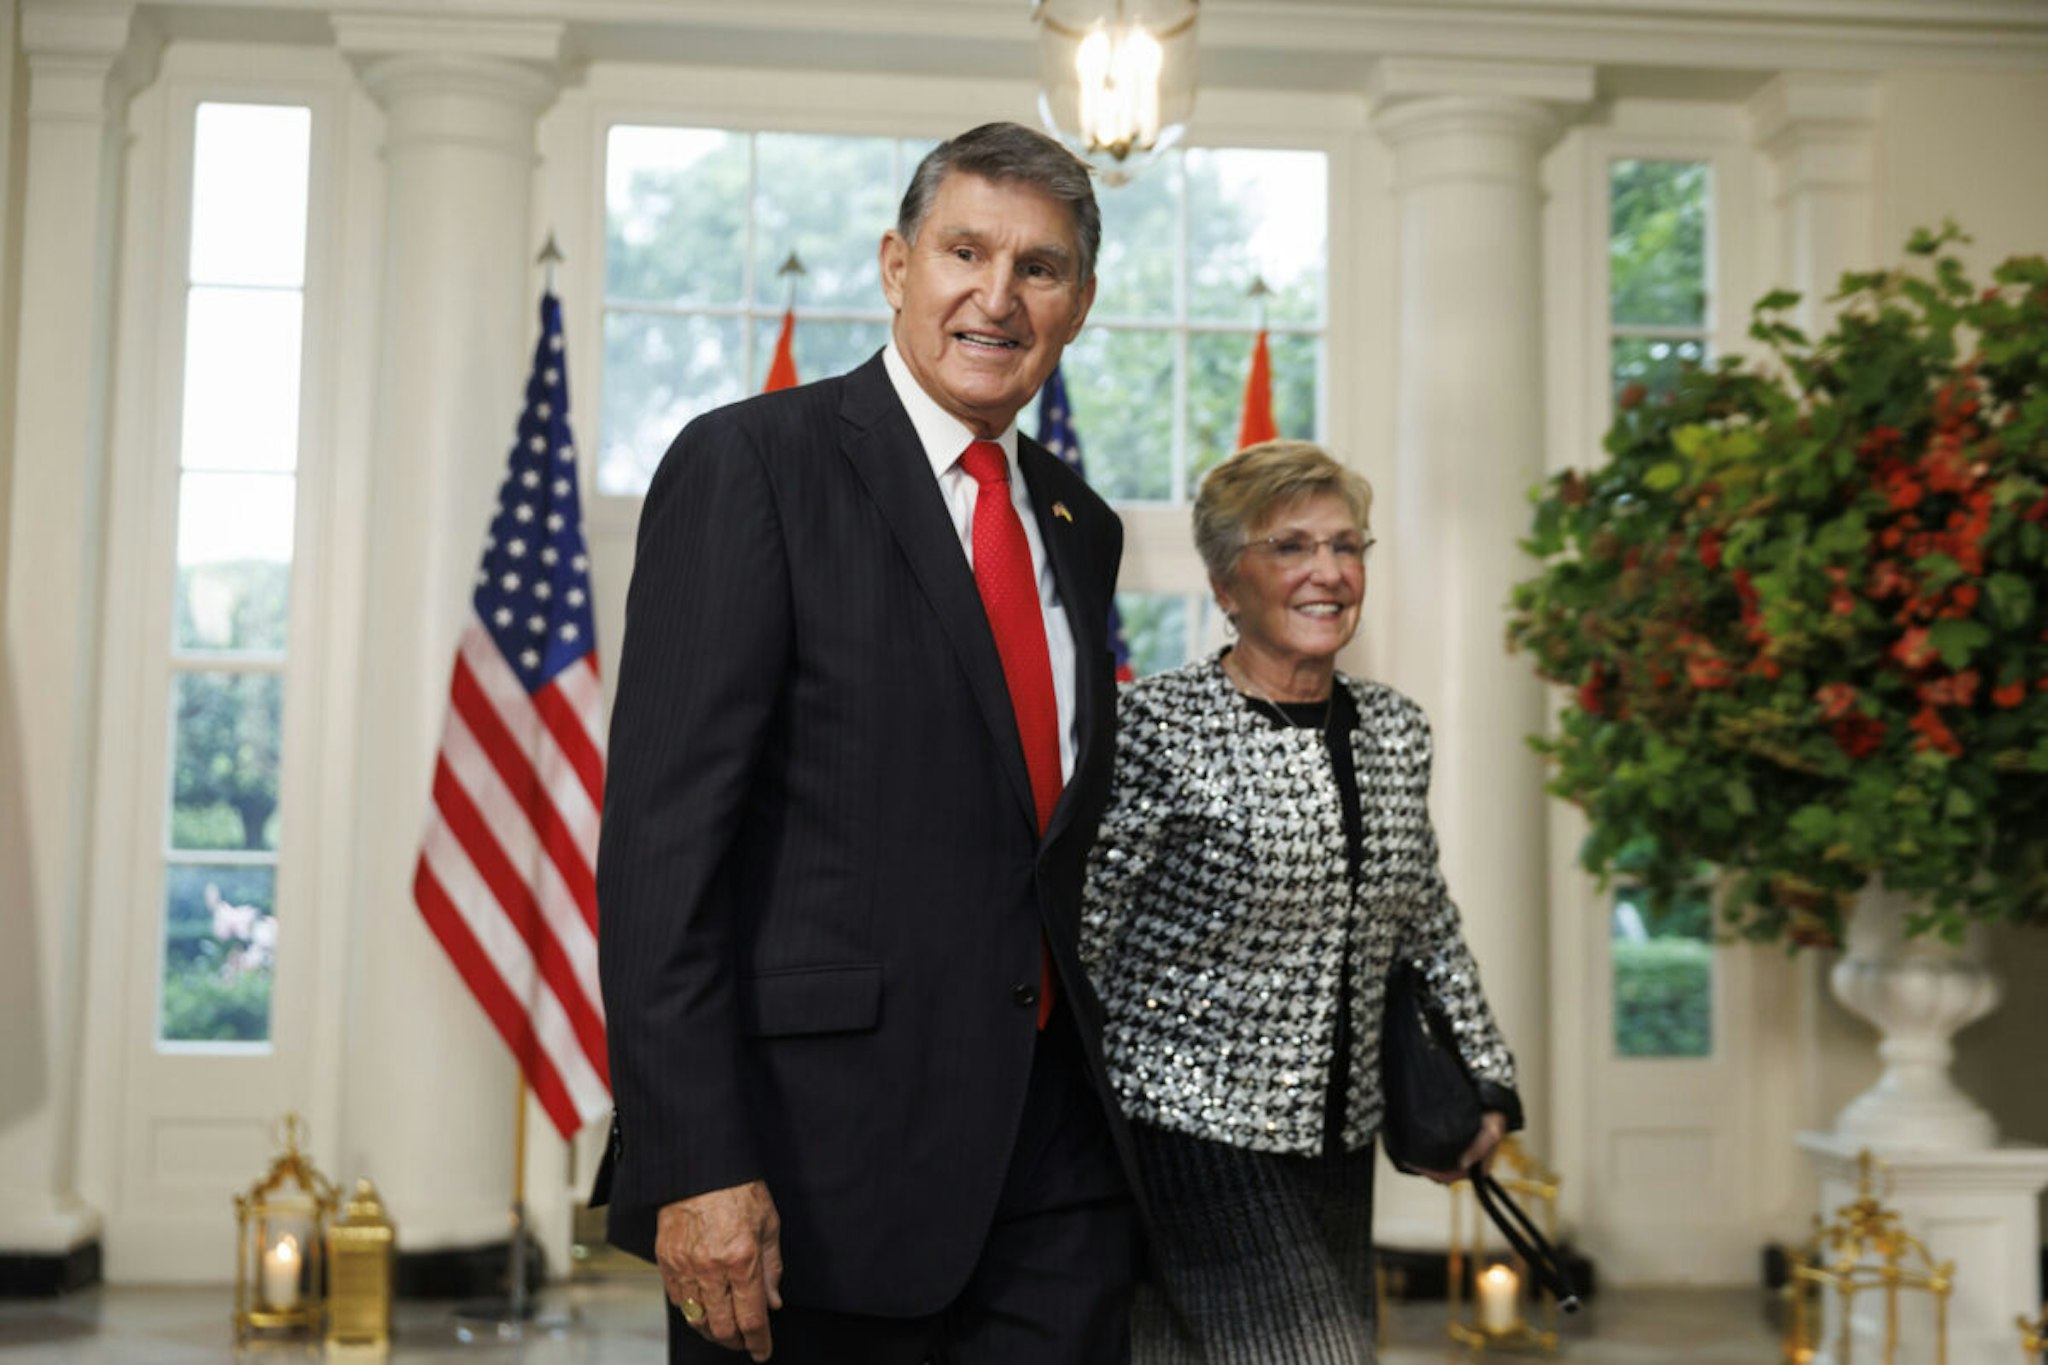 Senator Joe Manchin, a Democrat from West Virginia, left, and Gayle Manchin arrive to attend a state dinner in honor of Indian Prime Minister Narendra Modi hosted by US President Joe Biden and First Lady Jill Biden at the White House in Washington, DC, US, on Thursday, June 22, 2023.